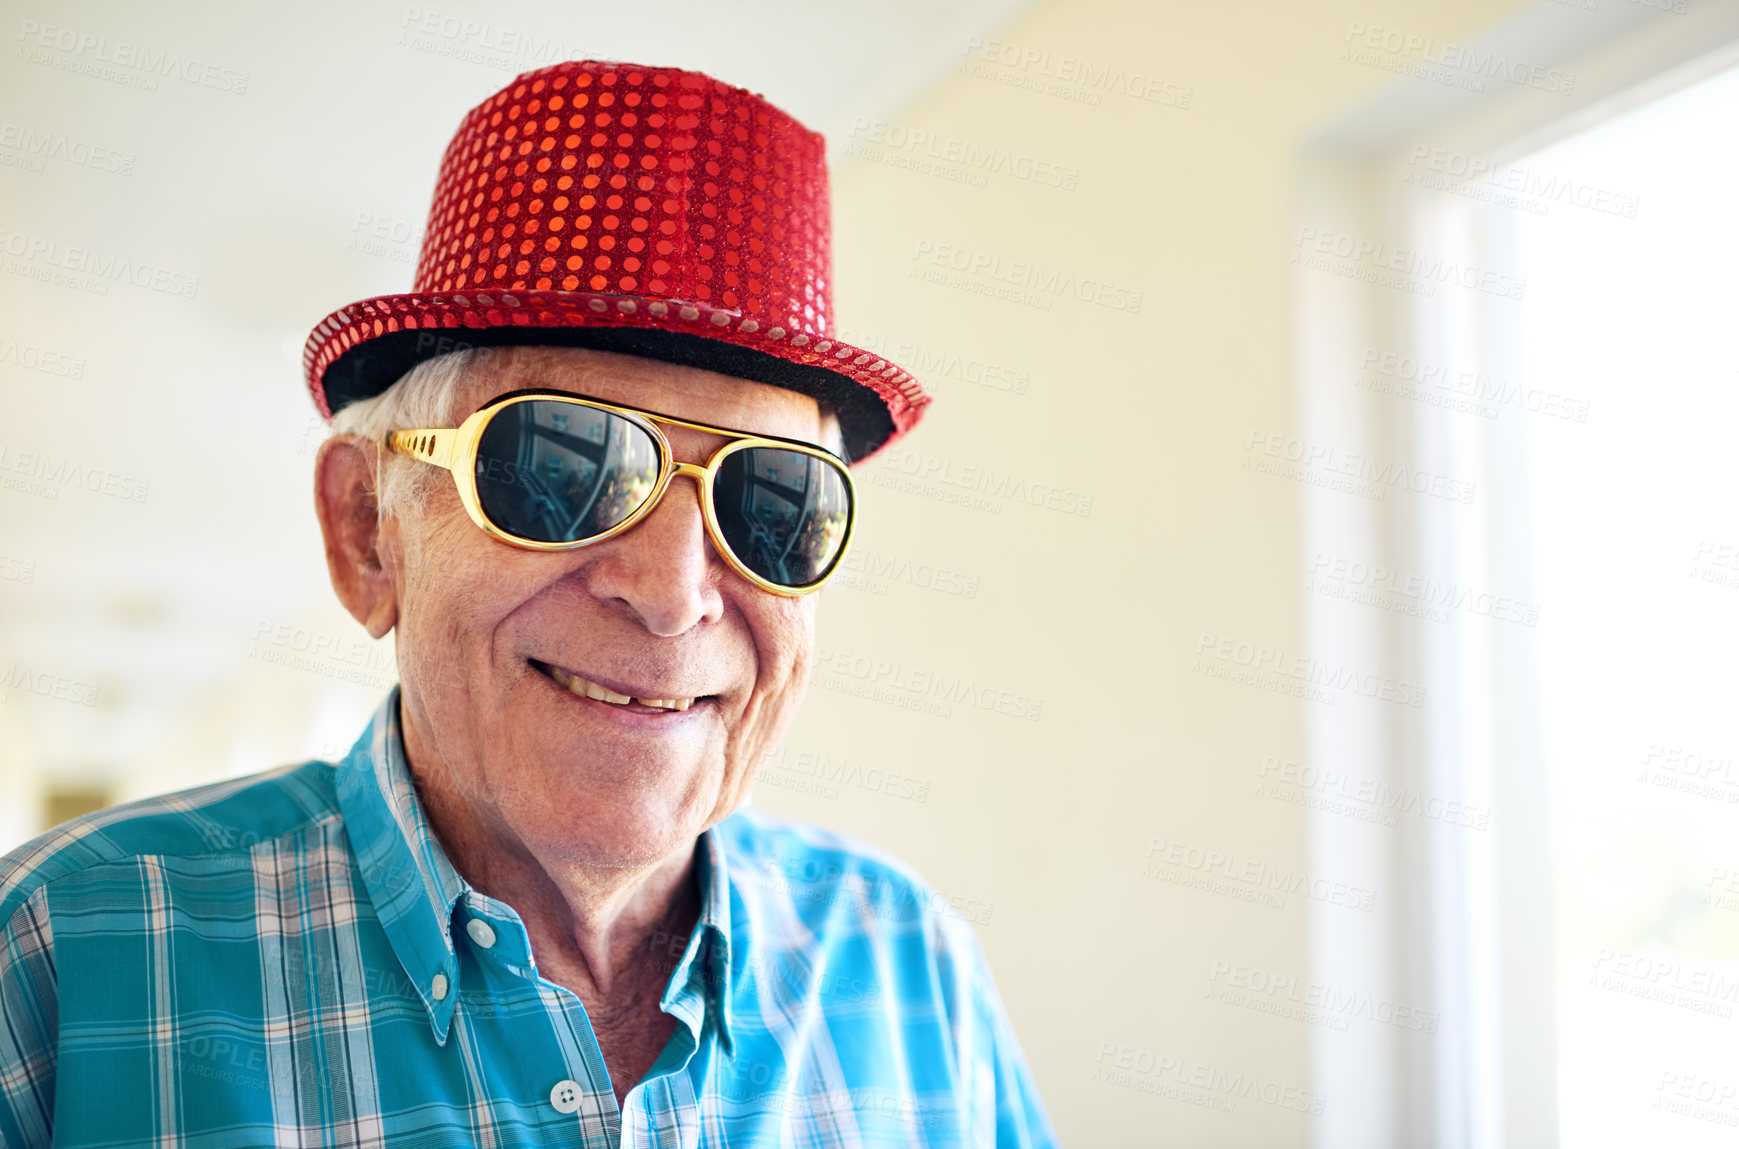 Buy stock photo Shot of a carefree elderly man wearing sunglasses and a hat inside of a building